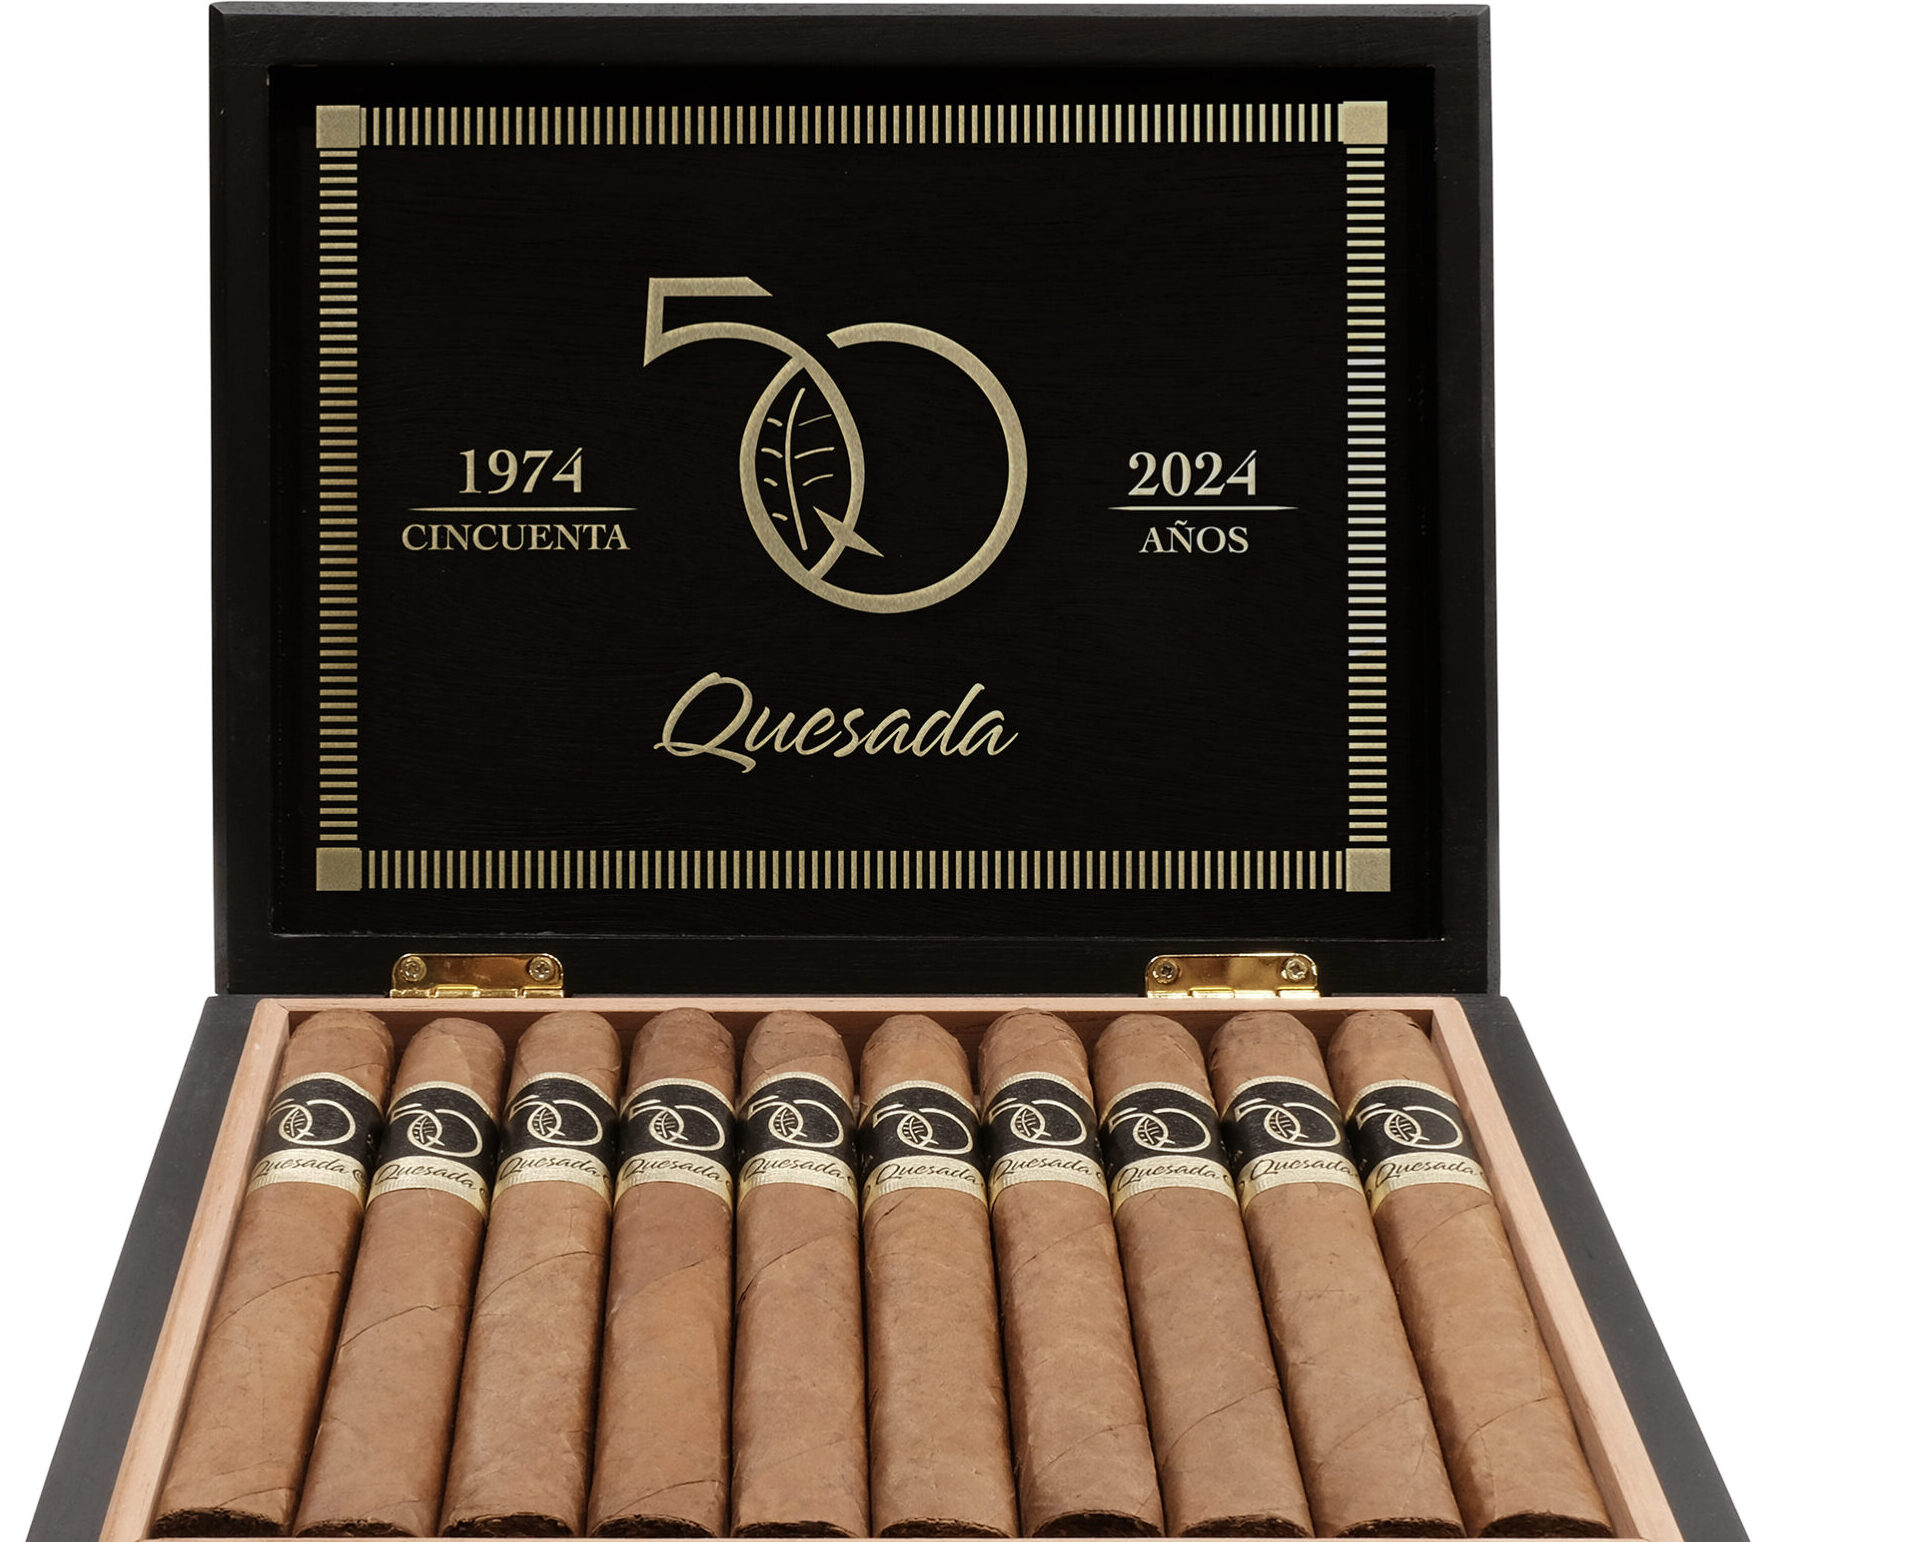 Quesada Celebrates 50 Years with Special Anniversary Cigar